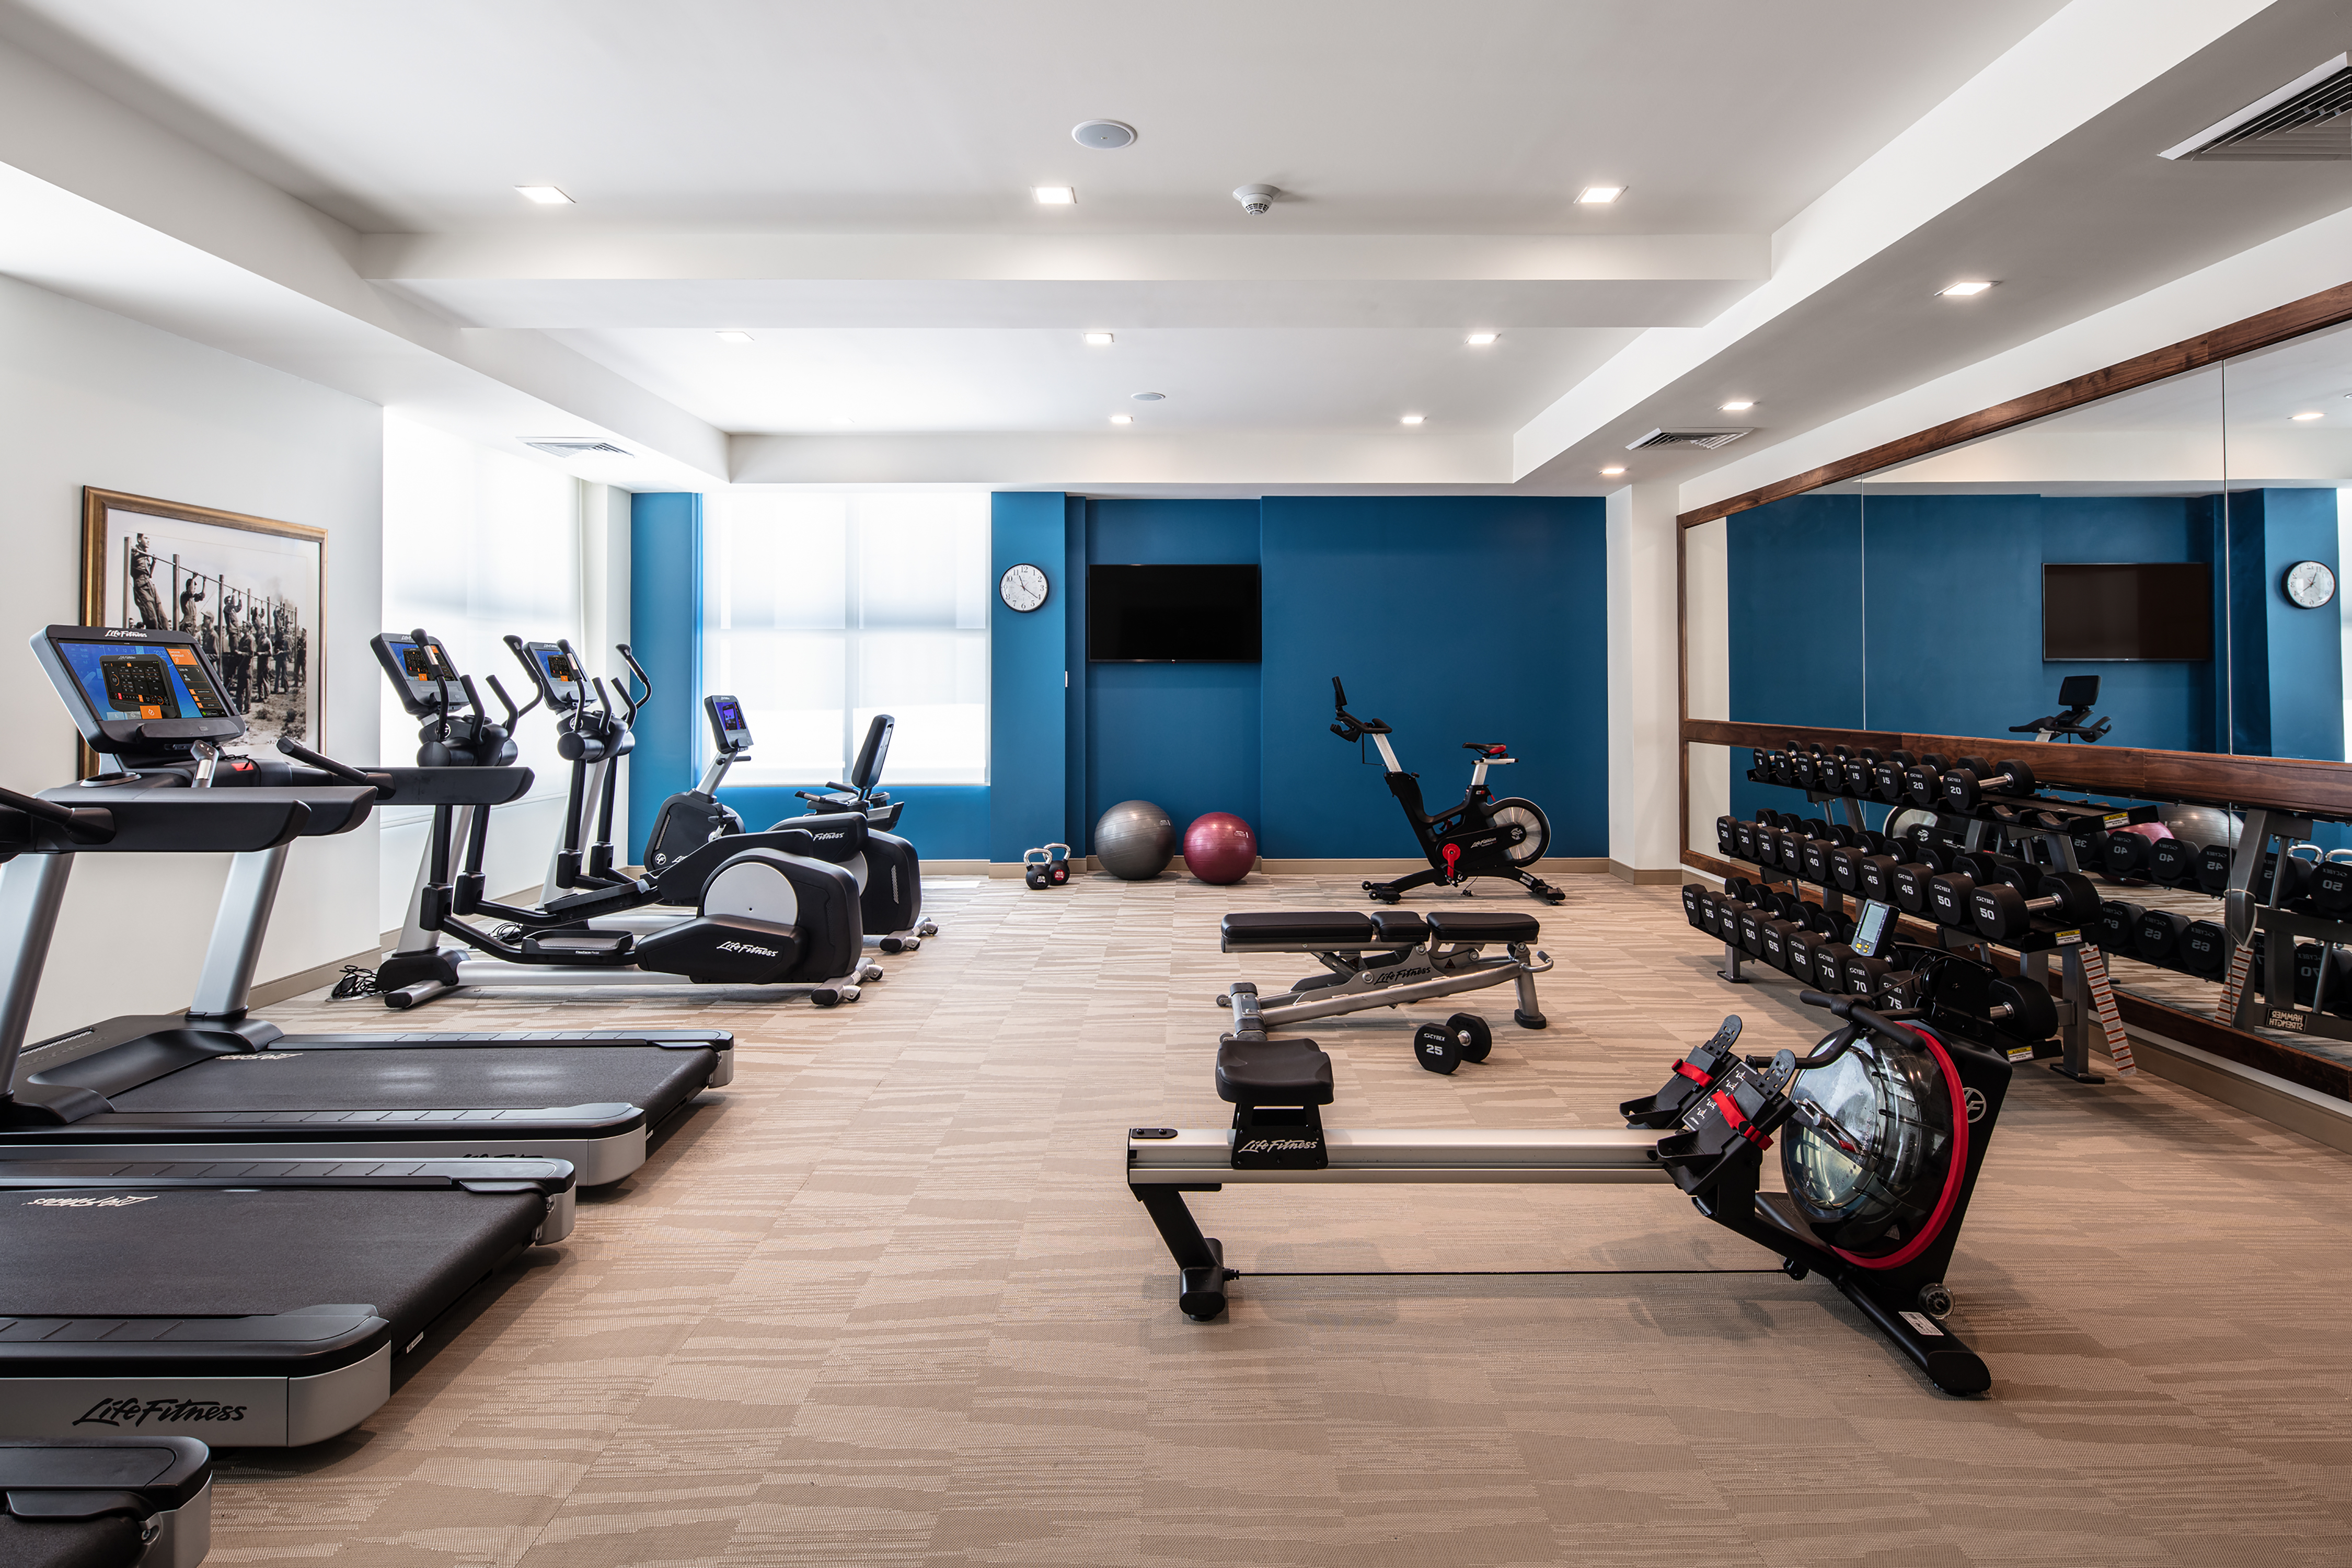 Fitness Center with Treadmills Recumbent Bikes and Weights